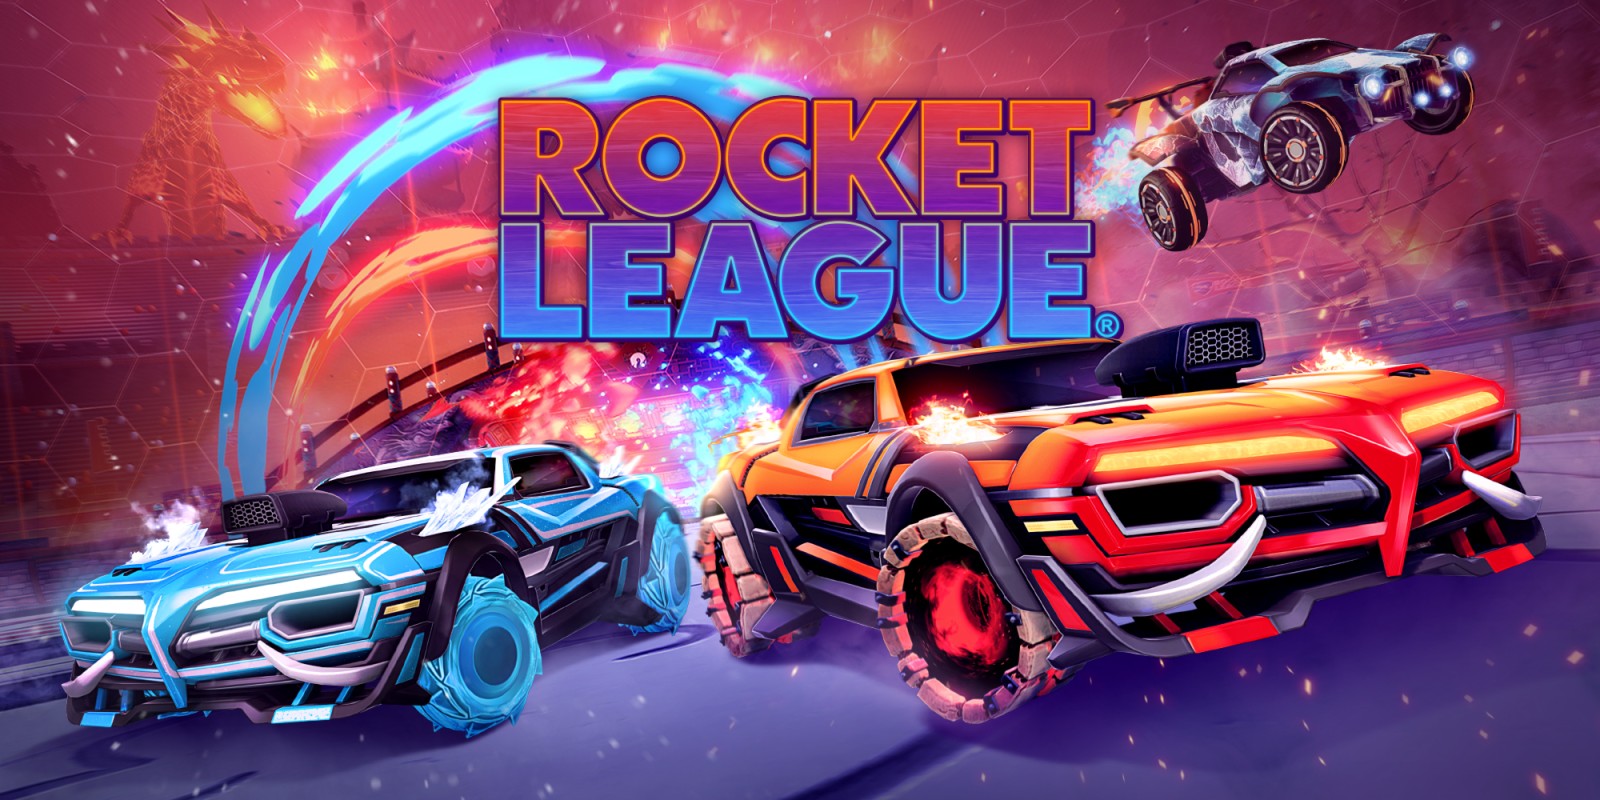 free steam accounts with rocket league